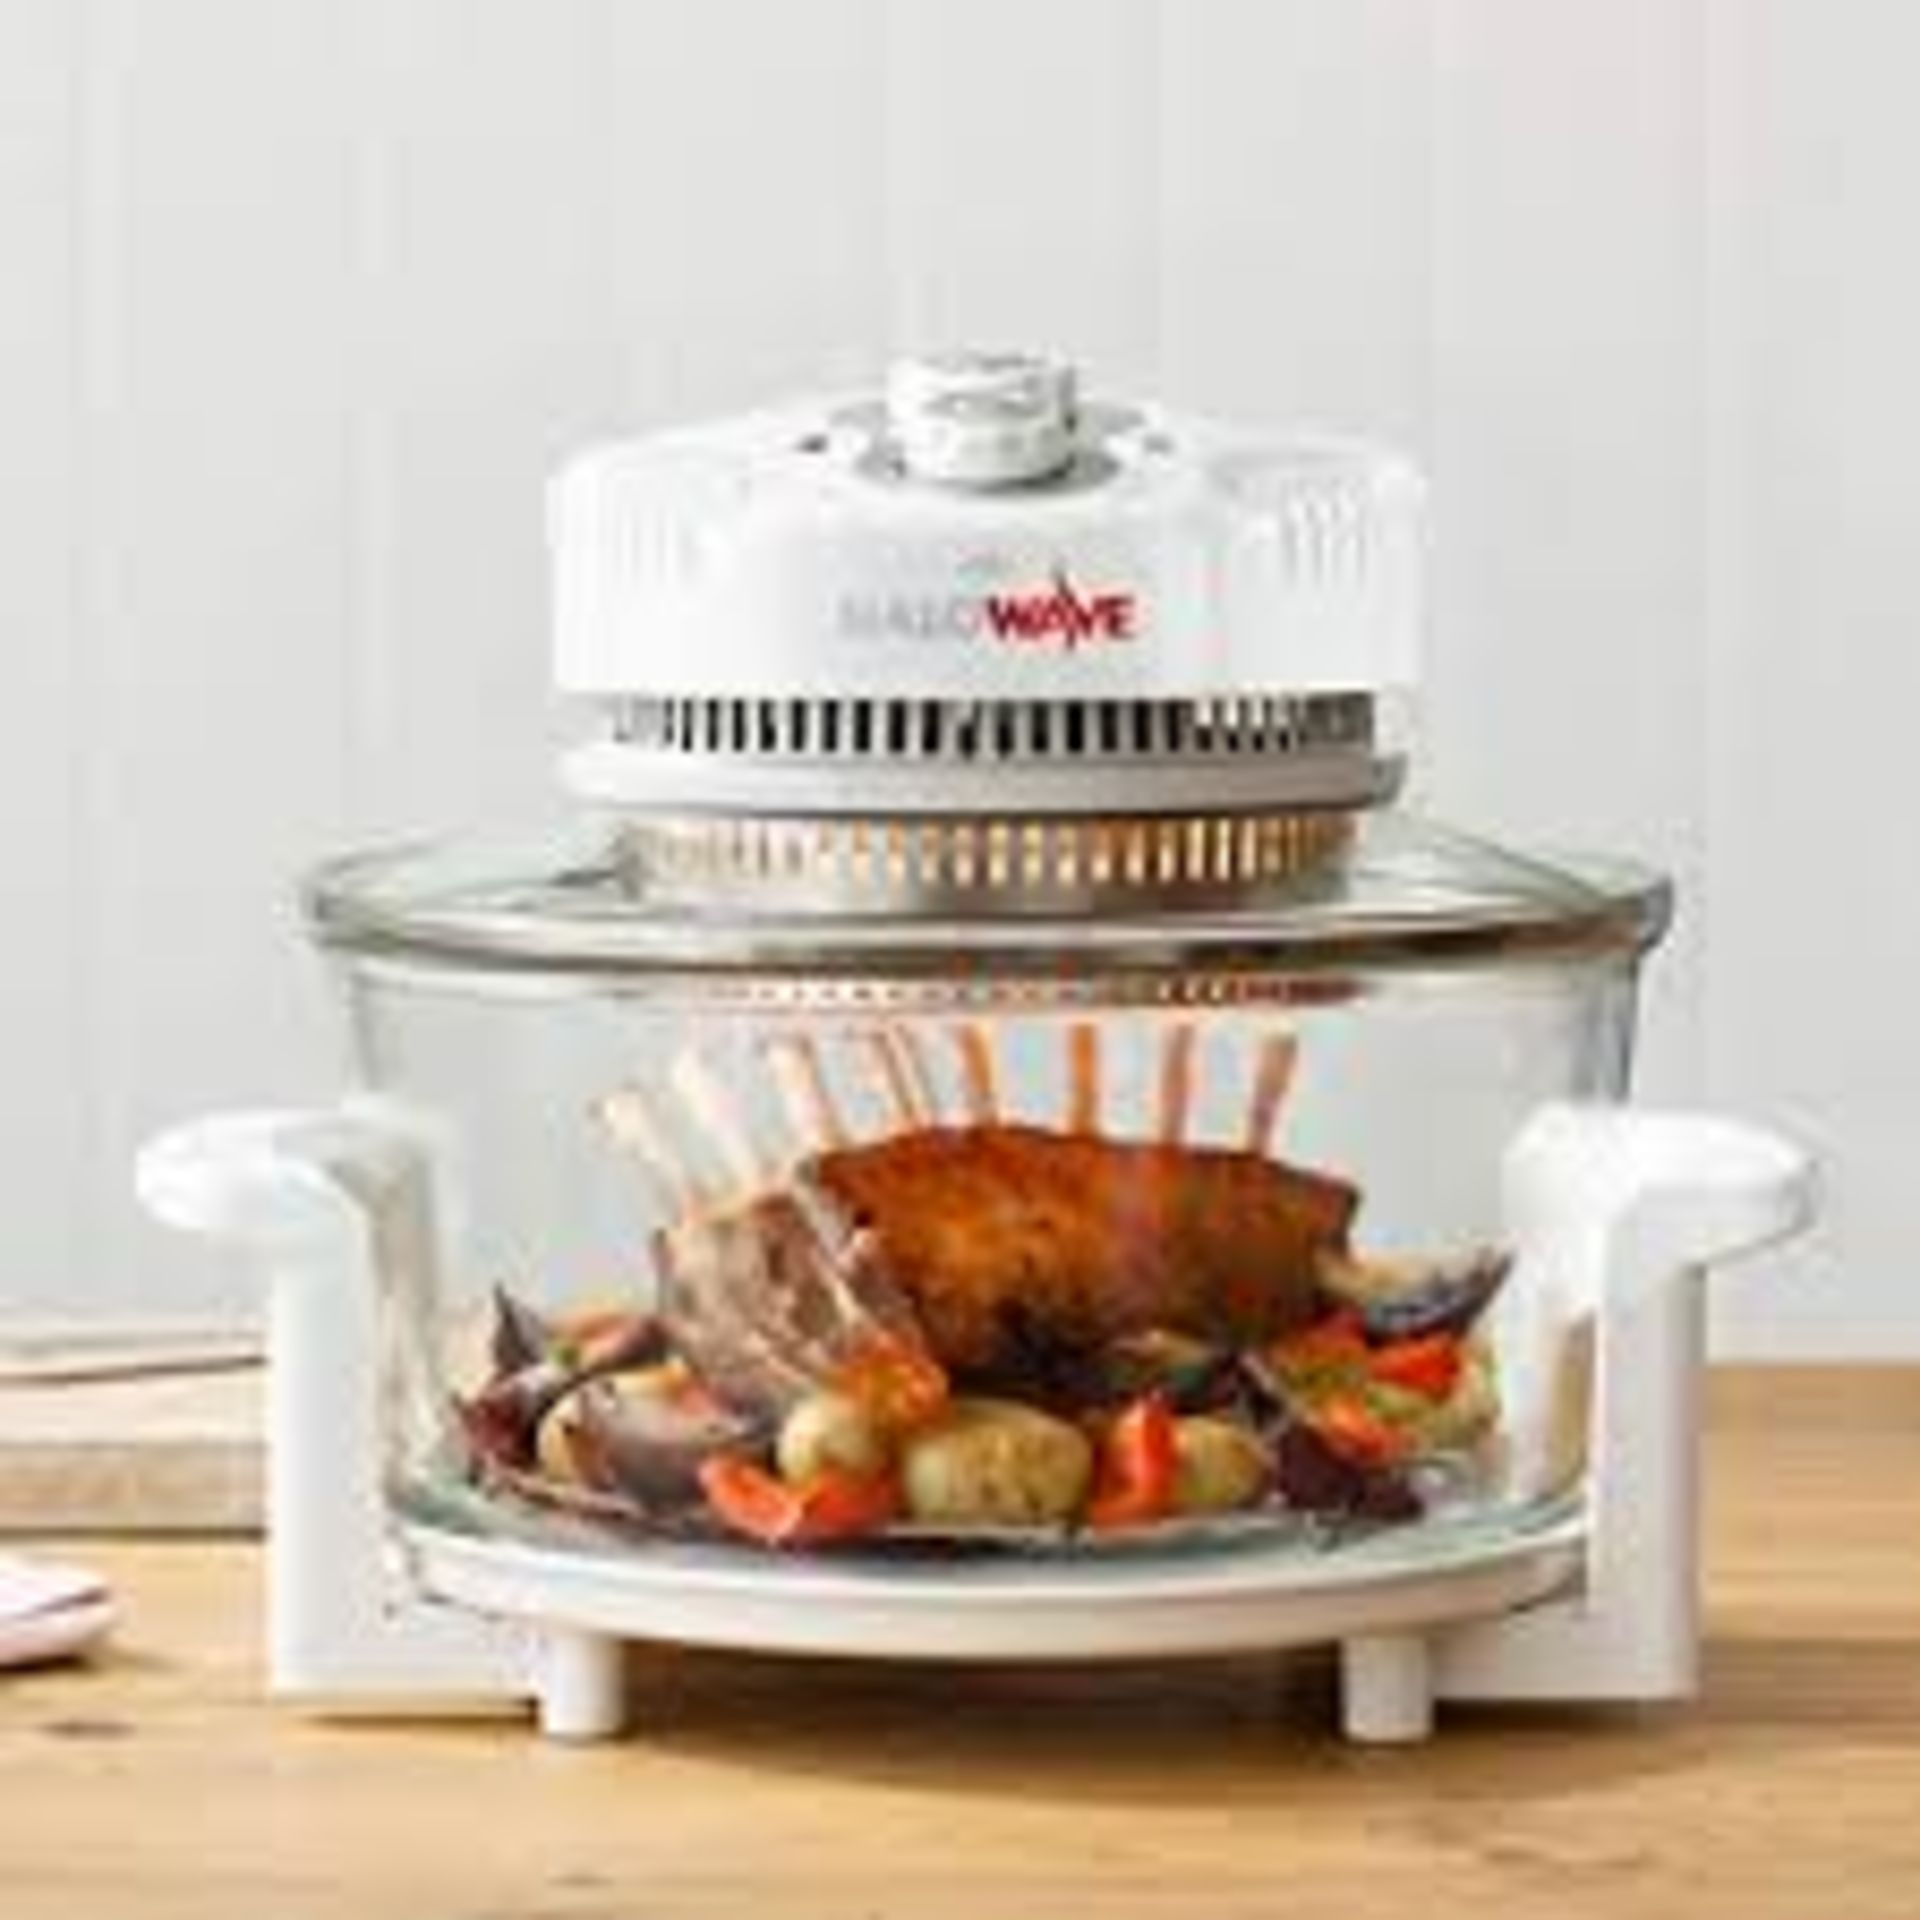 Boxed Hailo Wave 10.5L Capacity Electrically Heated Halogen Oven RRP £60 (15315) (Public Viewing and